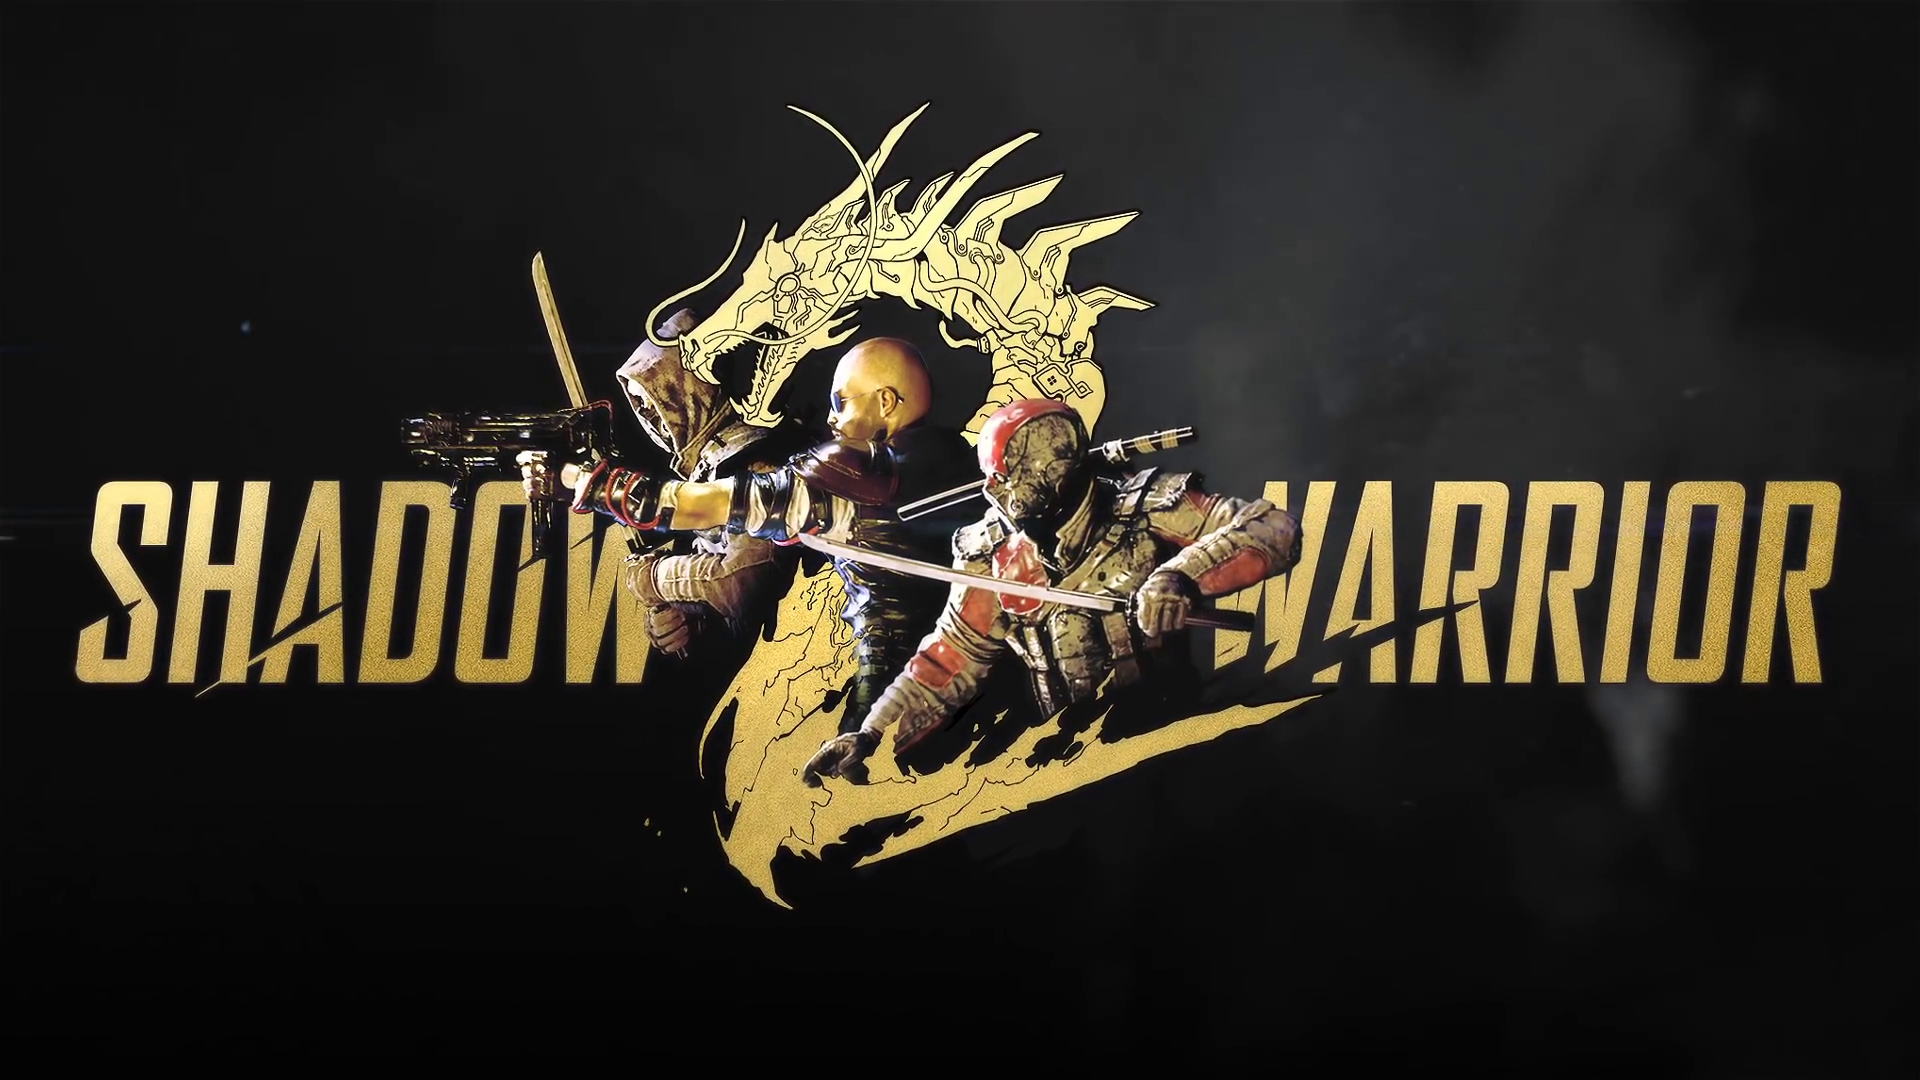 Shadow Warrior 2 Free Download Crohasit Download Pc Games For Free